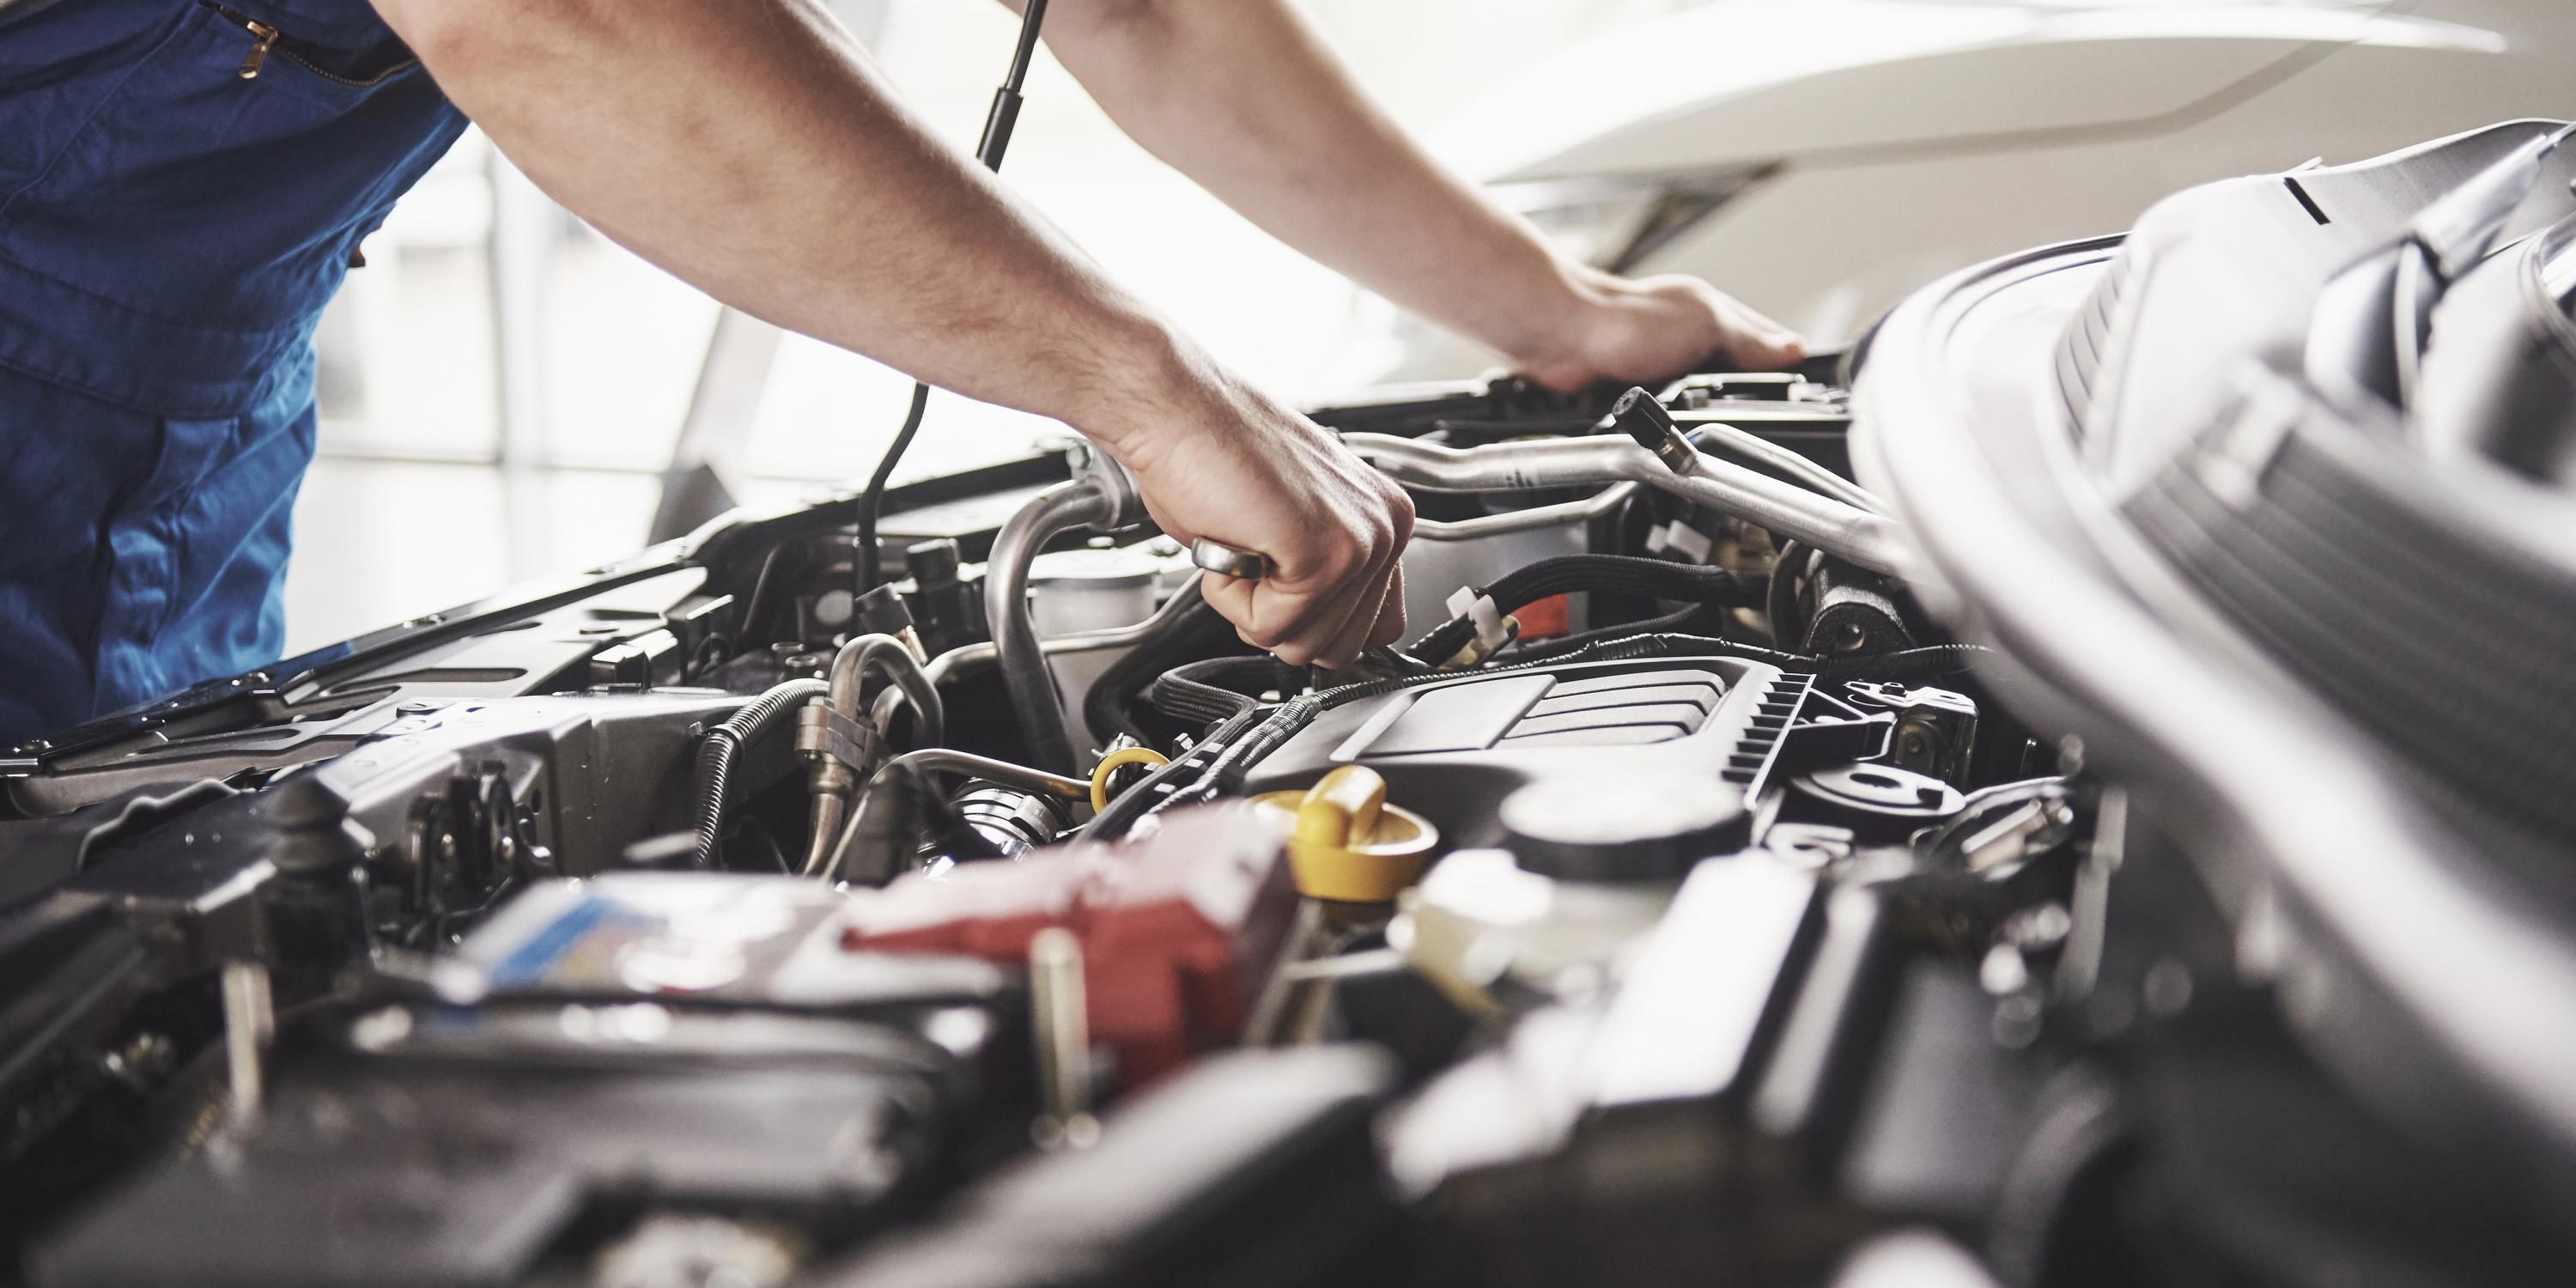 9 Routine Car Check-Ups That Can Help Avoid Costly Repairs